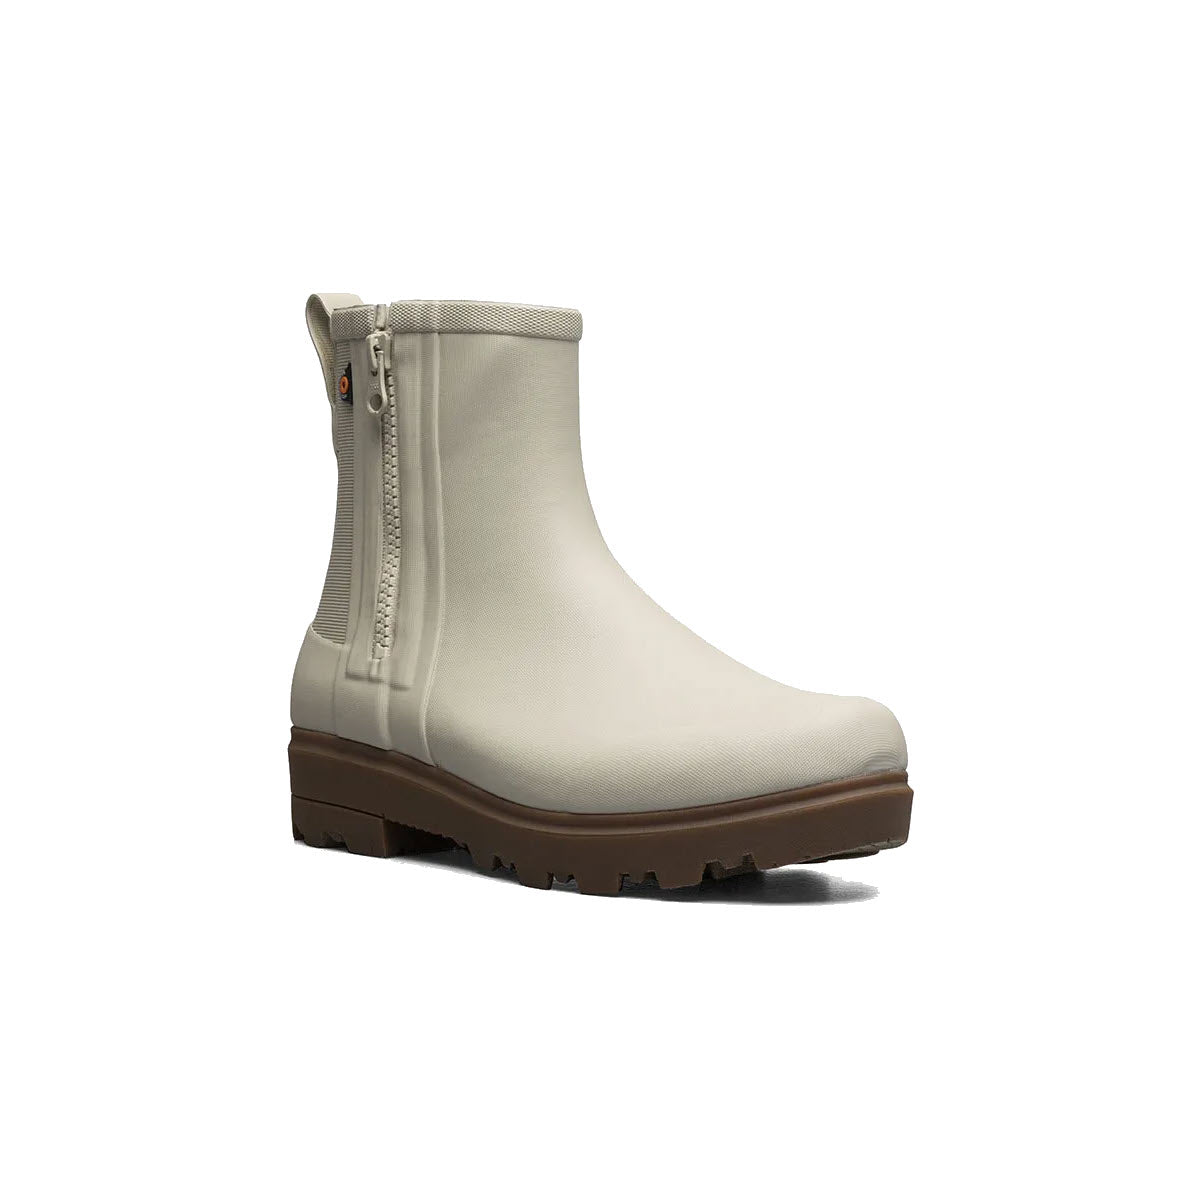 A light beige chelsea boot with elastic side panels and a zipper, featuring a chunky brown sole and Bogs Rebound Cushioning.